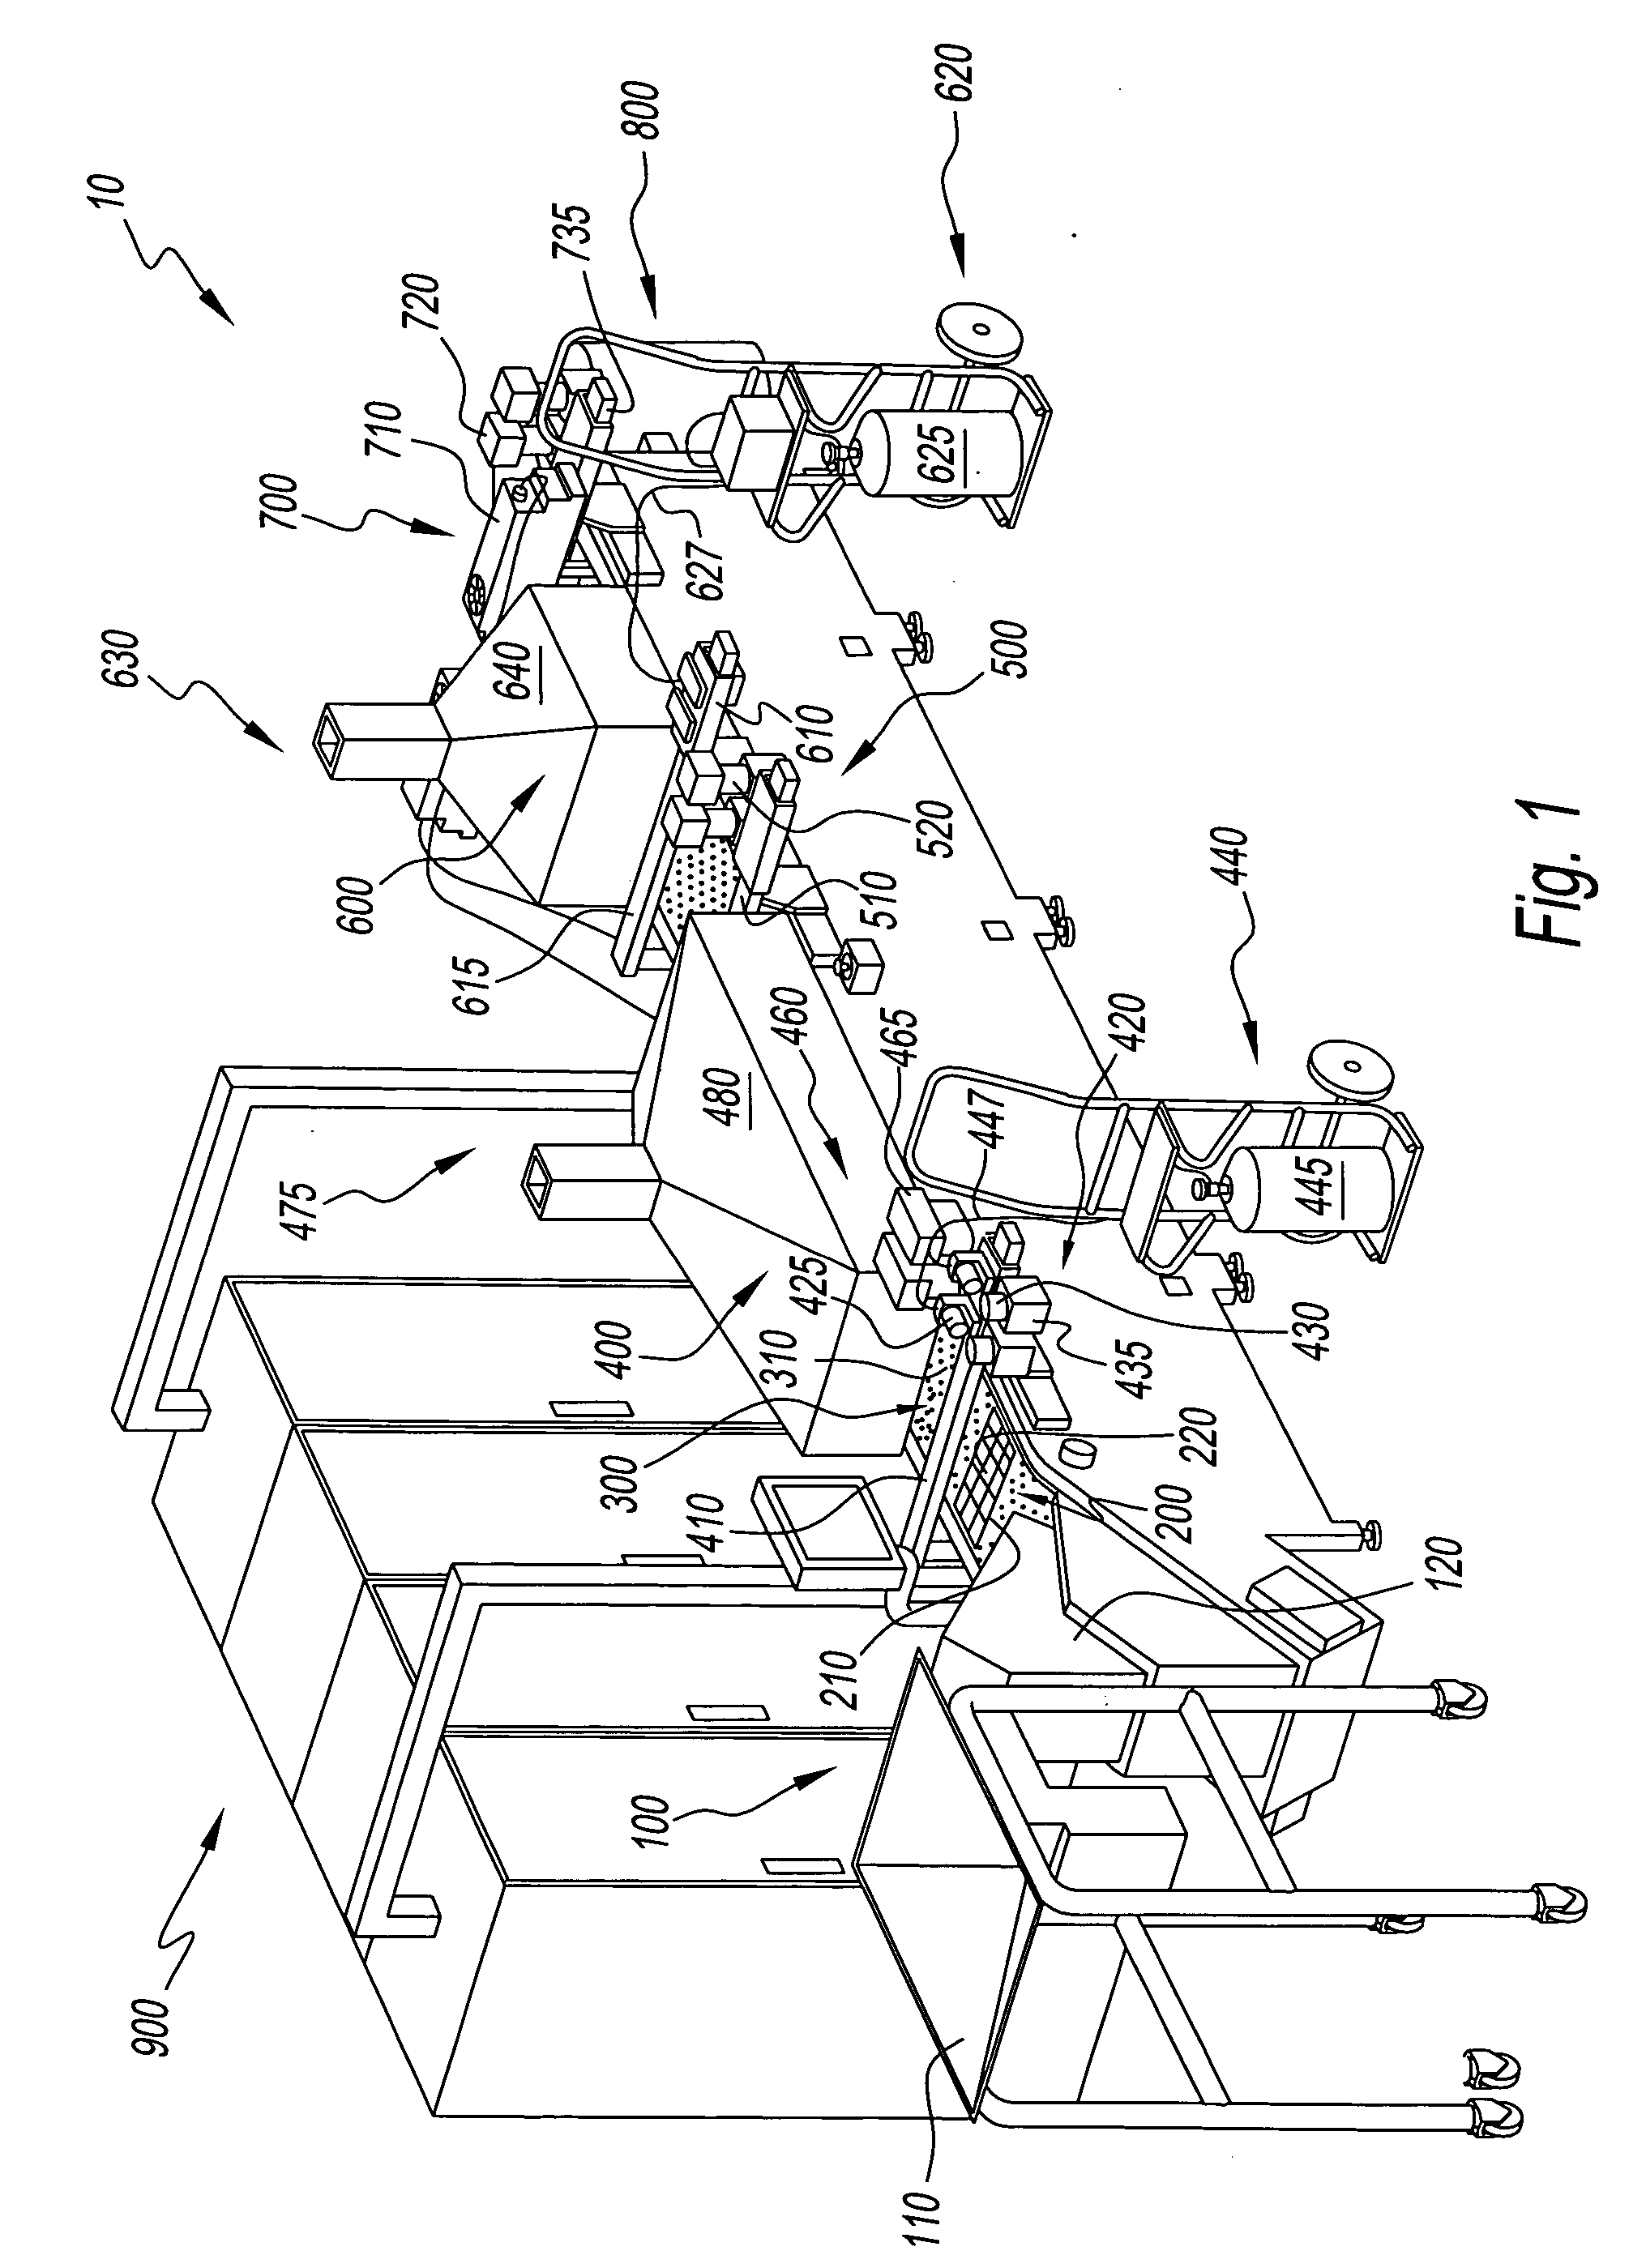 Apparatus for producing a pharmaceutical product